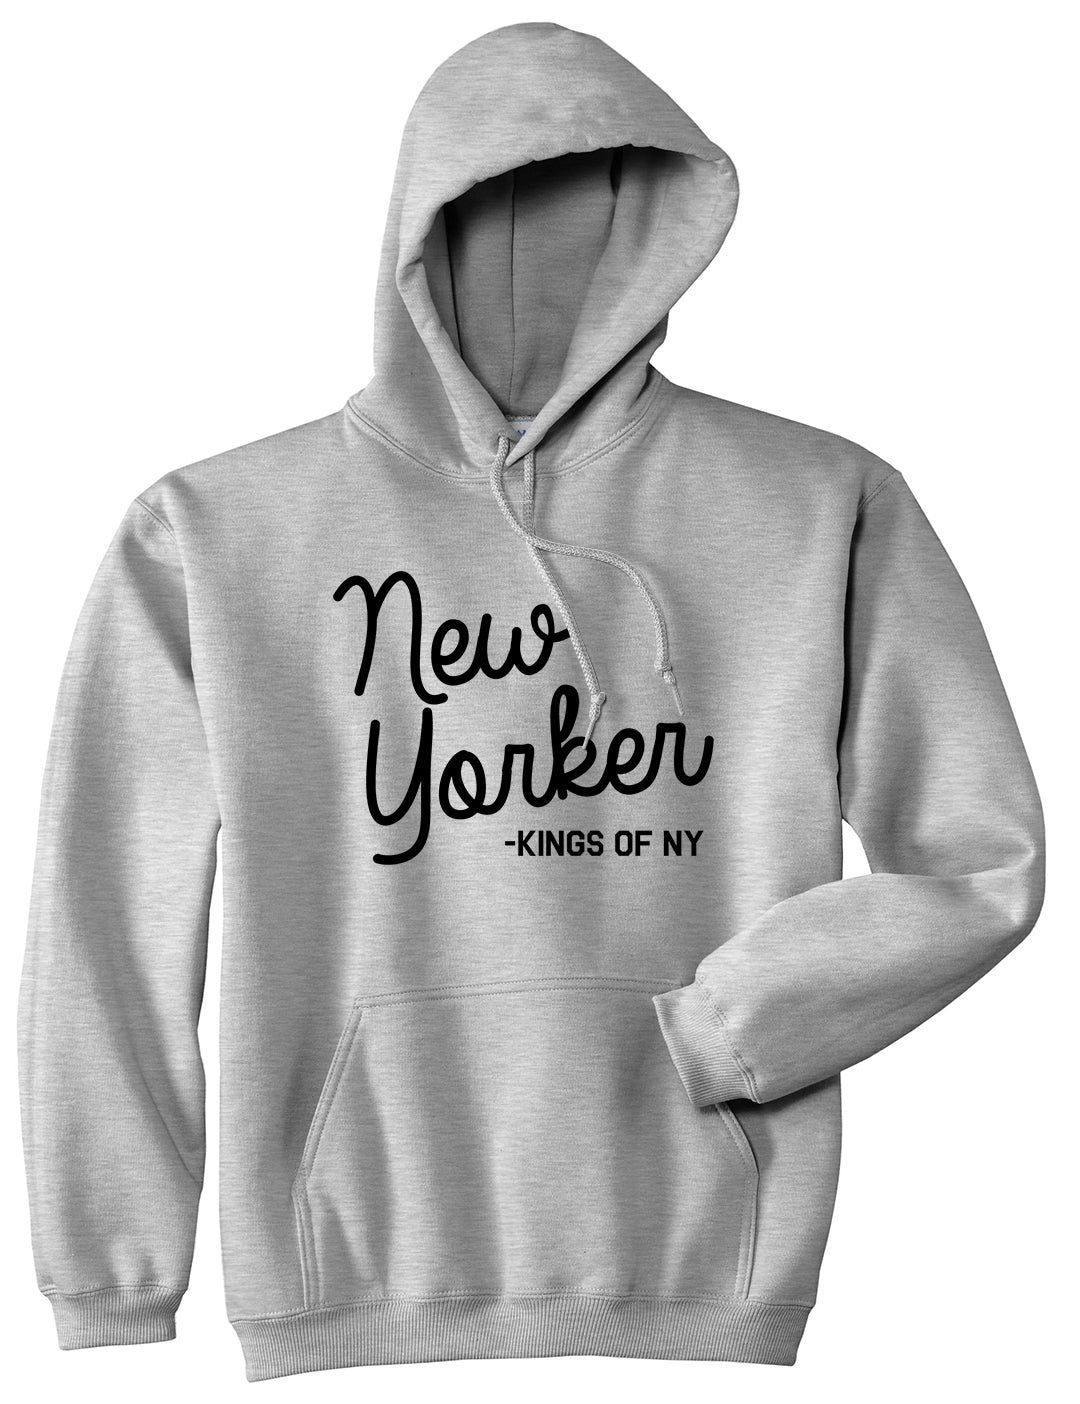 New Yorker Script Mens Pullover Hoodie Grey by Kings Of NY